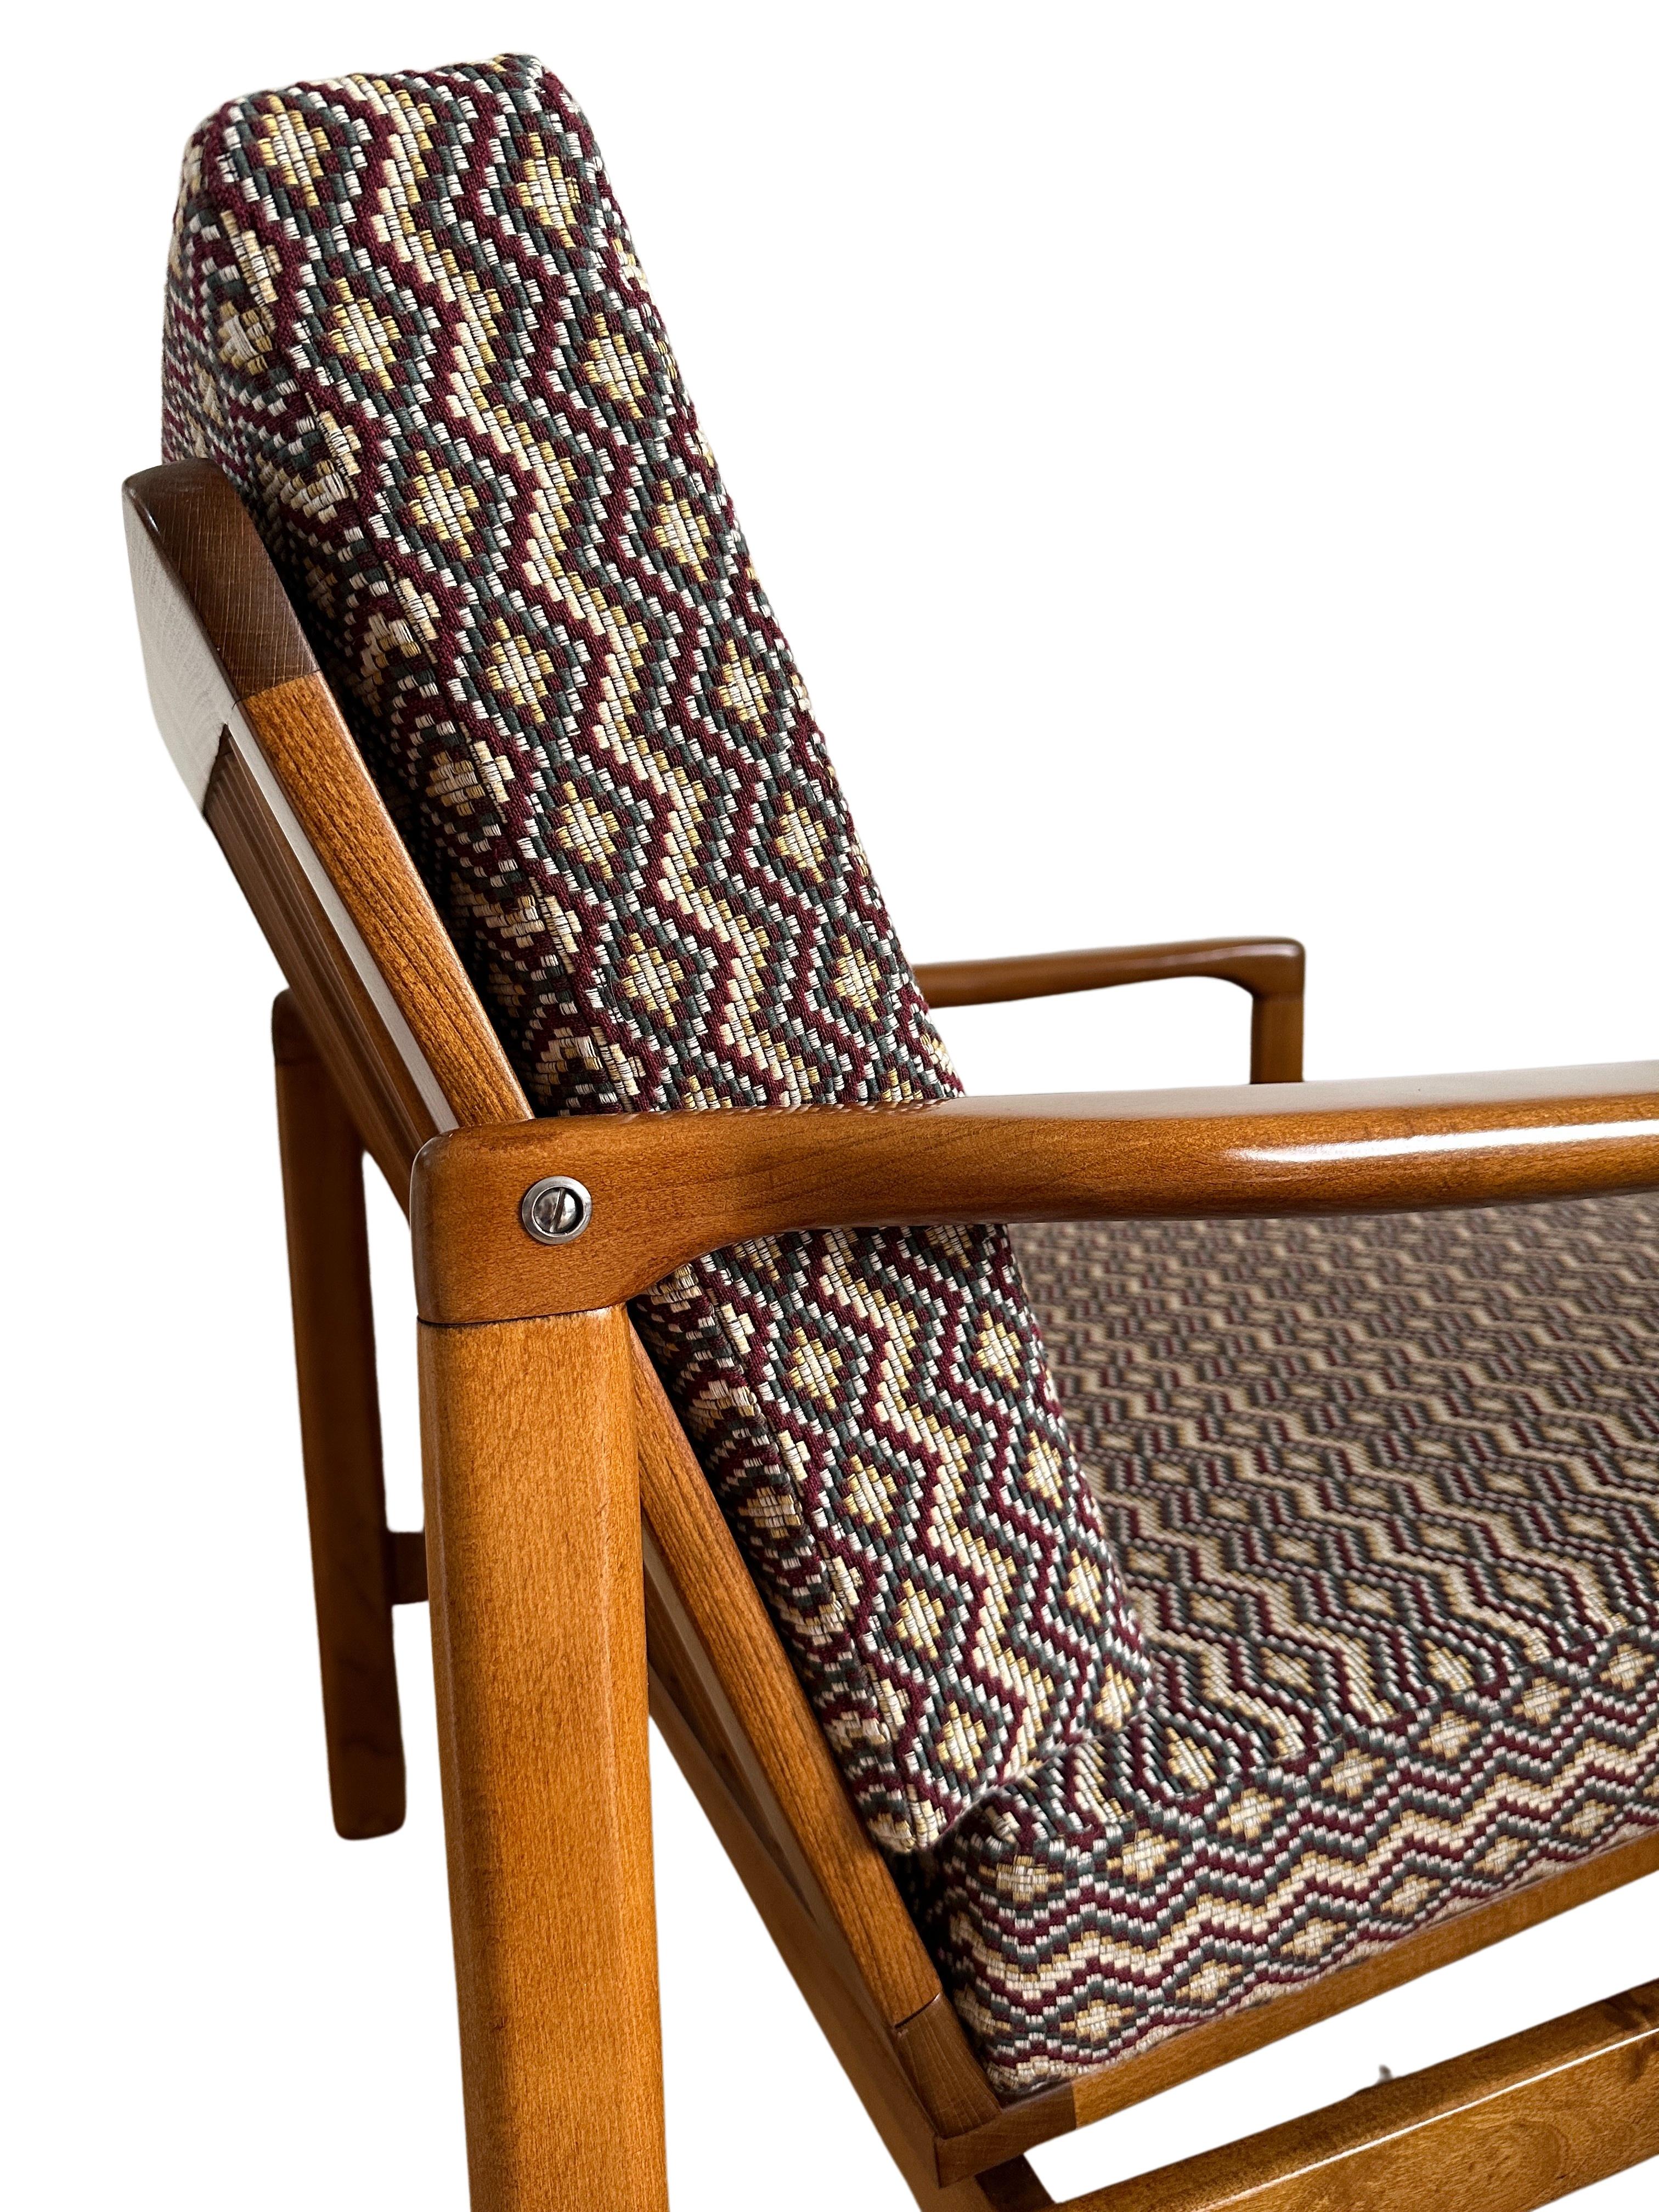 Midcentury Armchair, in Geometric and Ethnic Fabric, Europe, 1960s For Sale 4